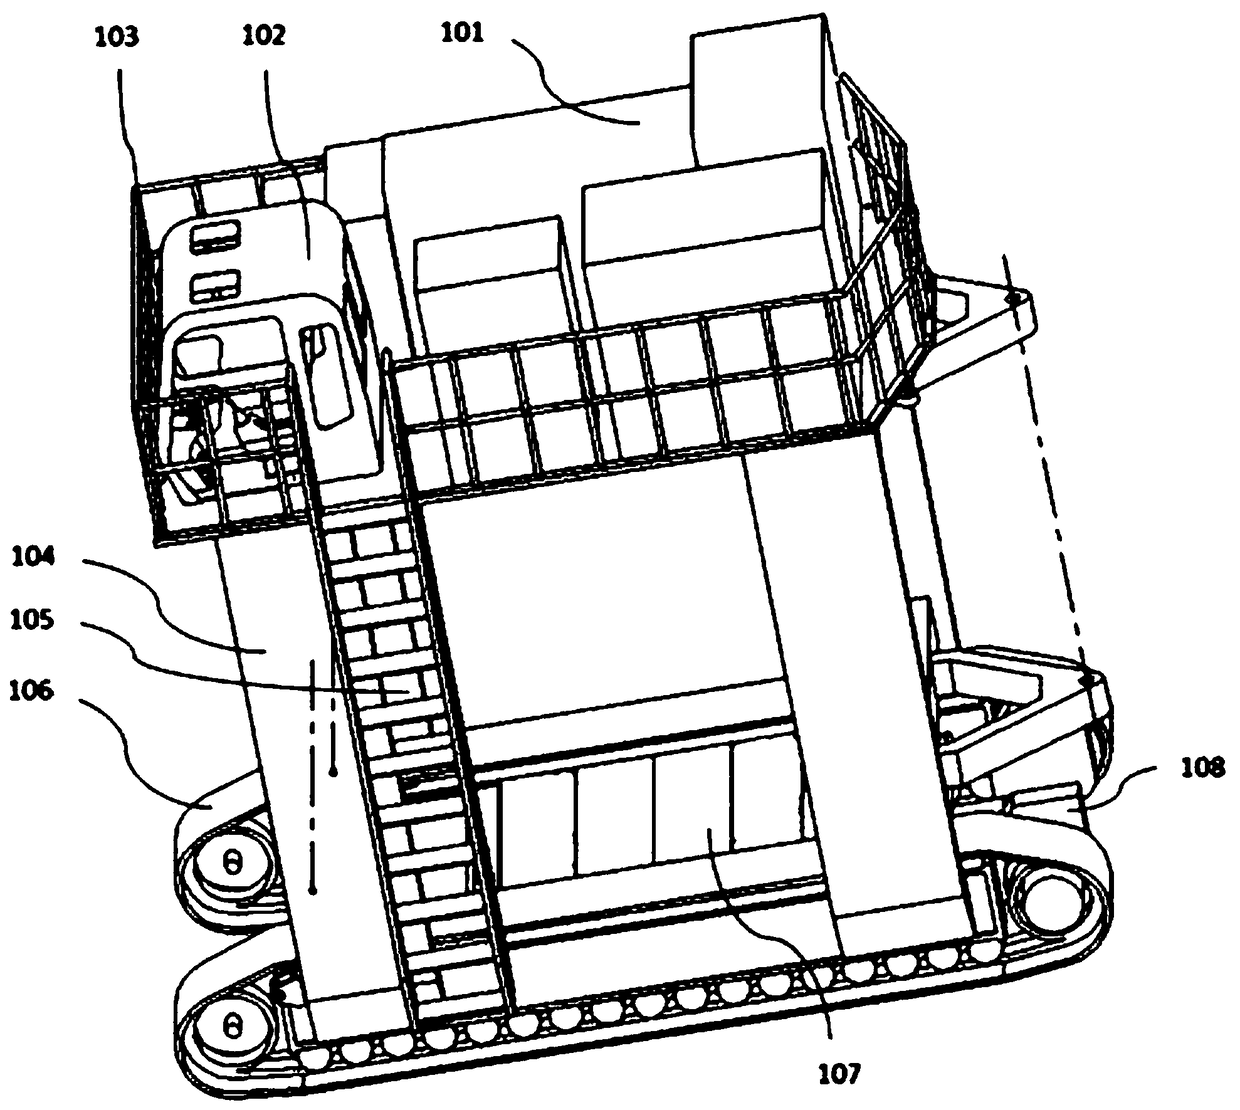 Continuous loading loader for open pit mines